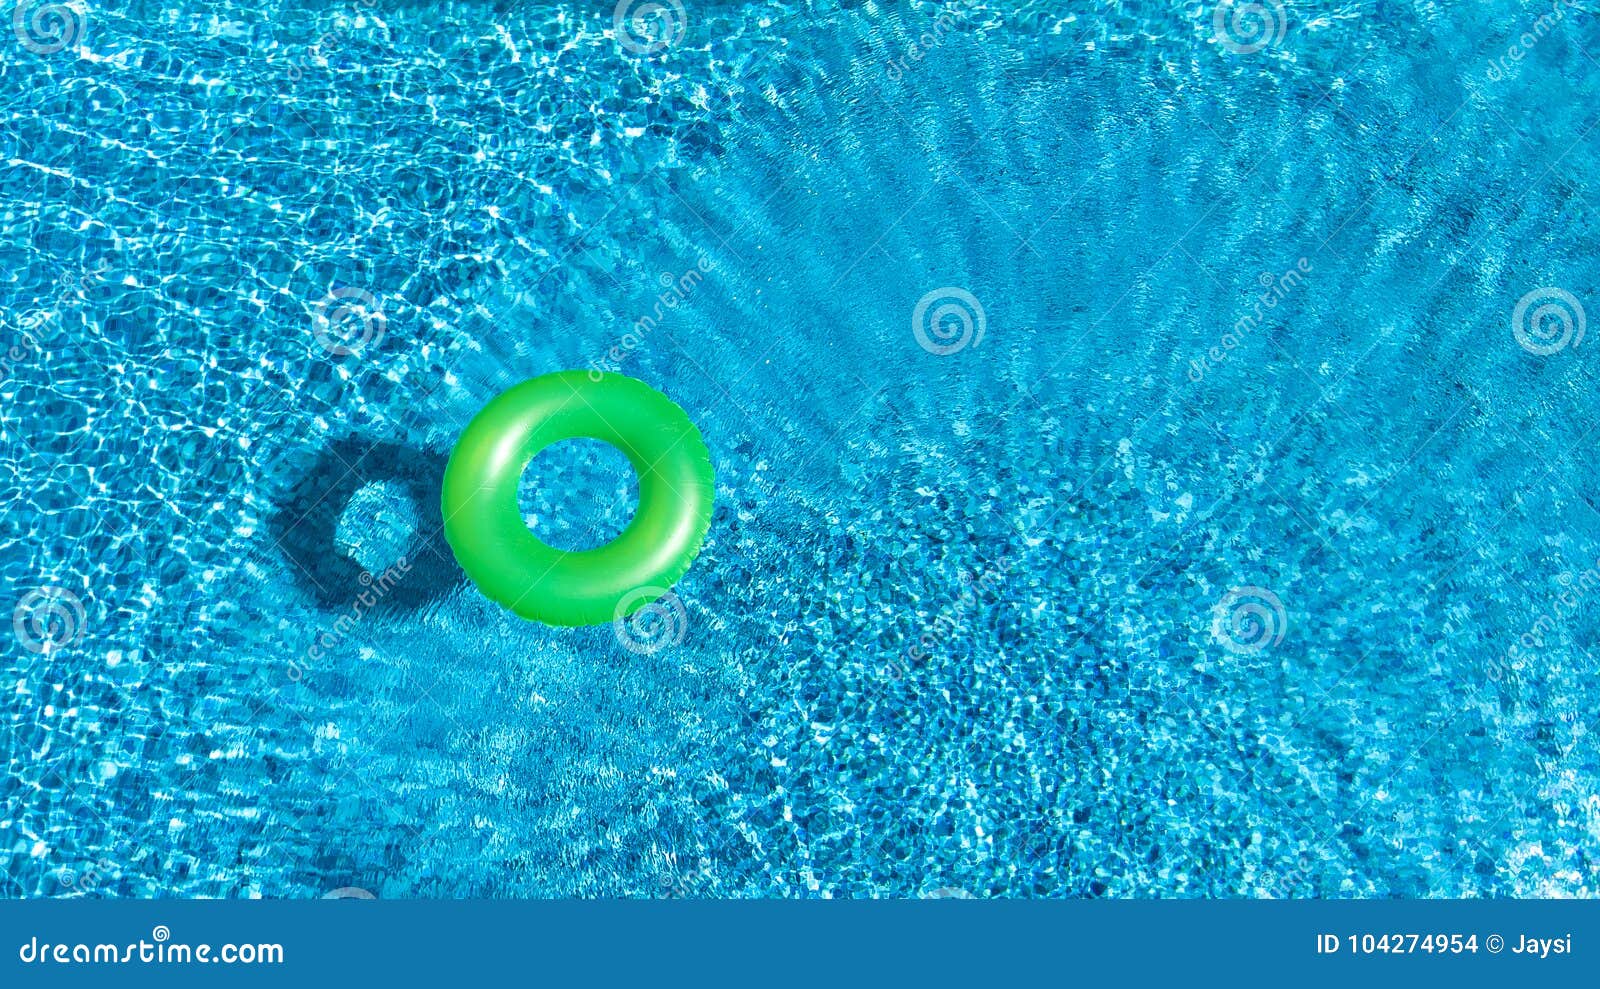 Aerial View of Colorful Inflatable Ring Donut Toy in Swimming Pool ...